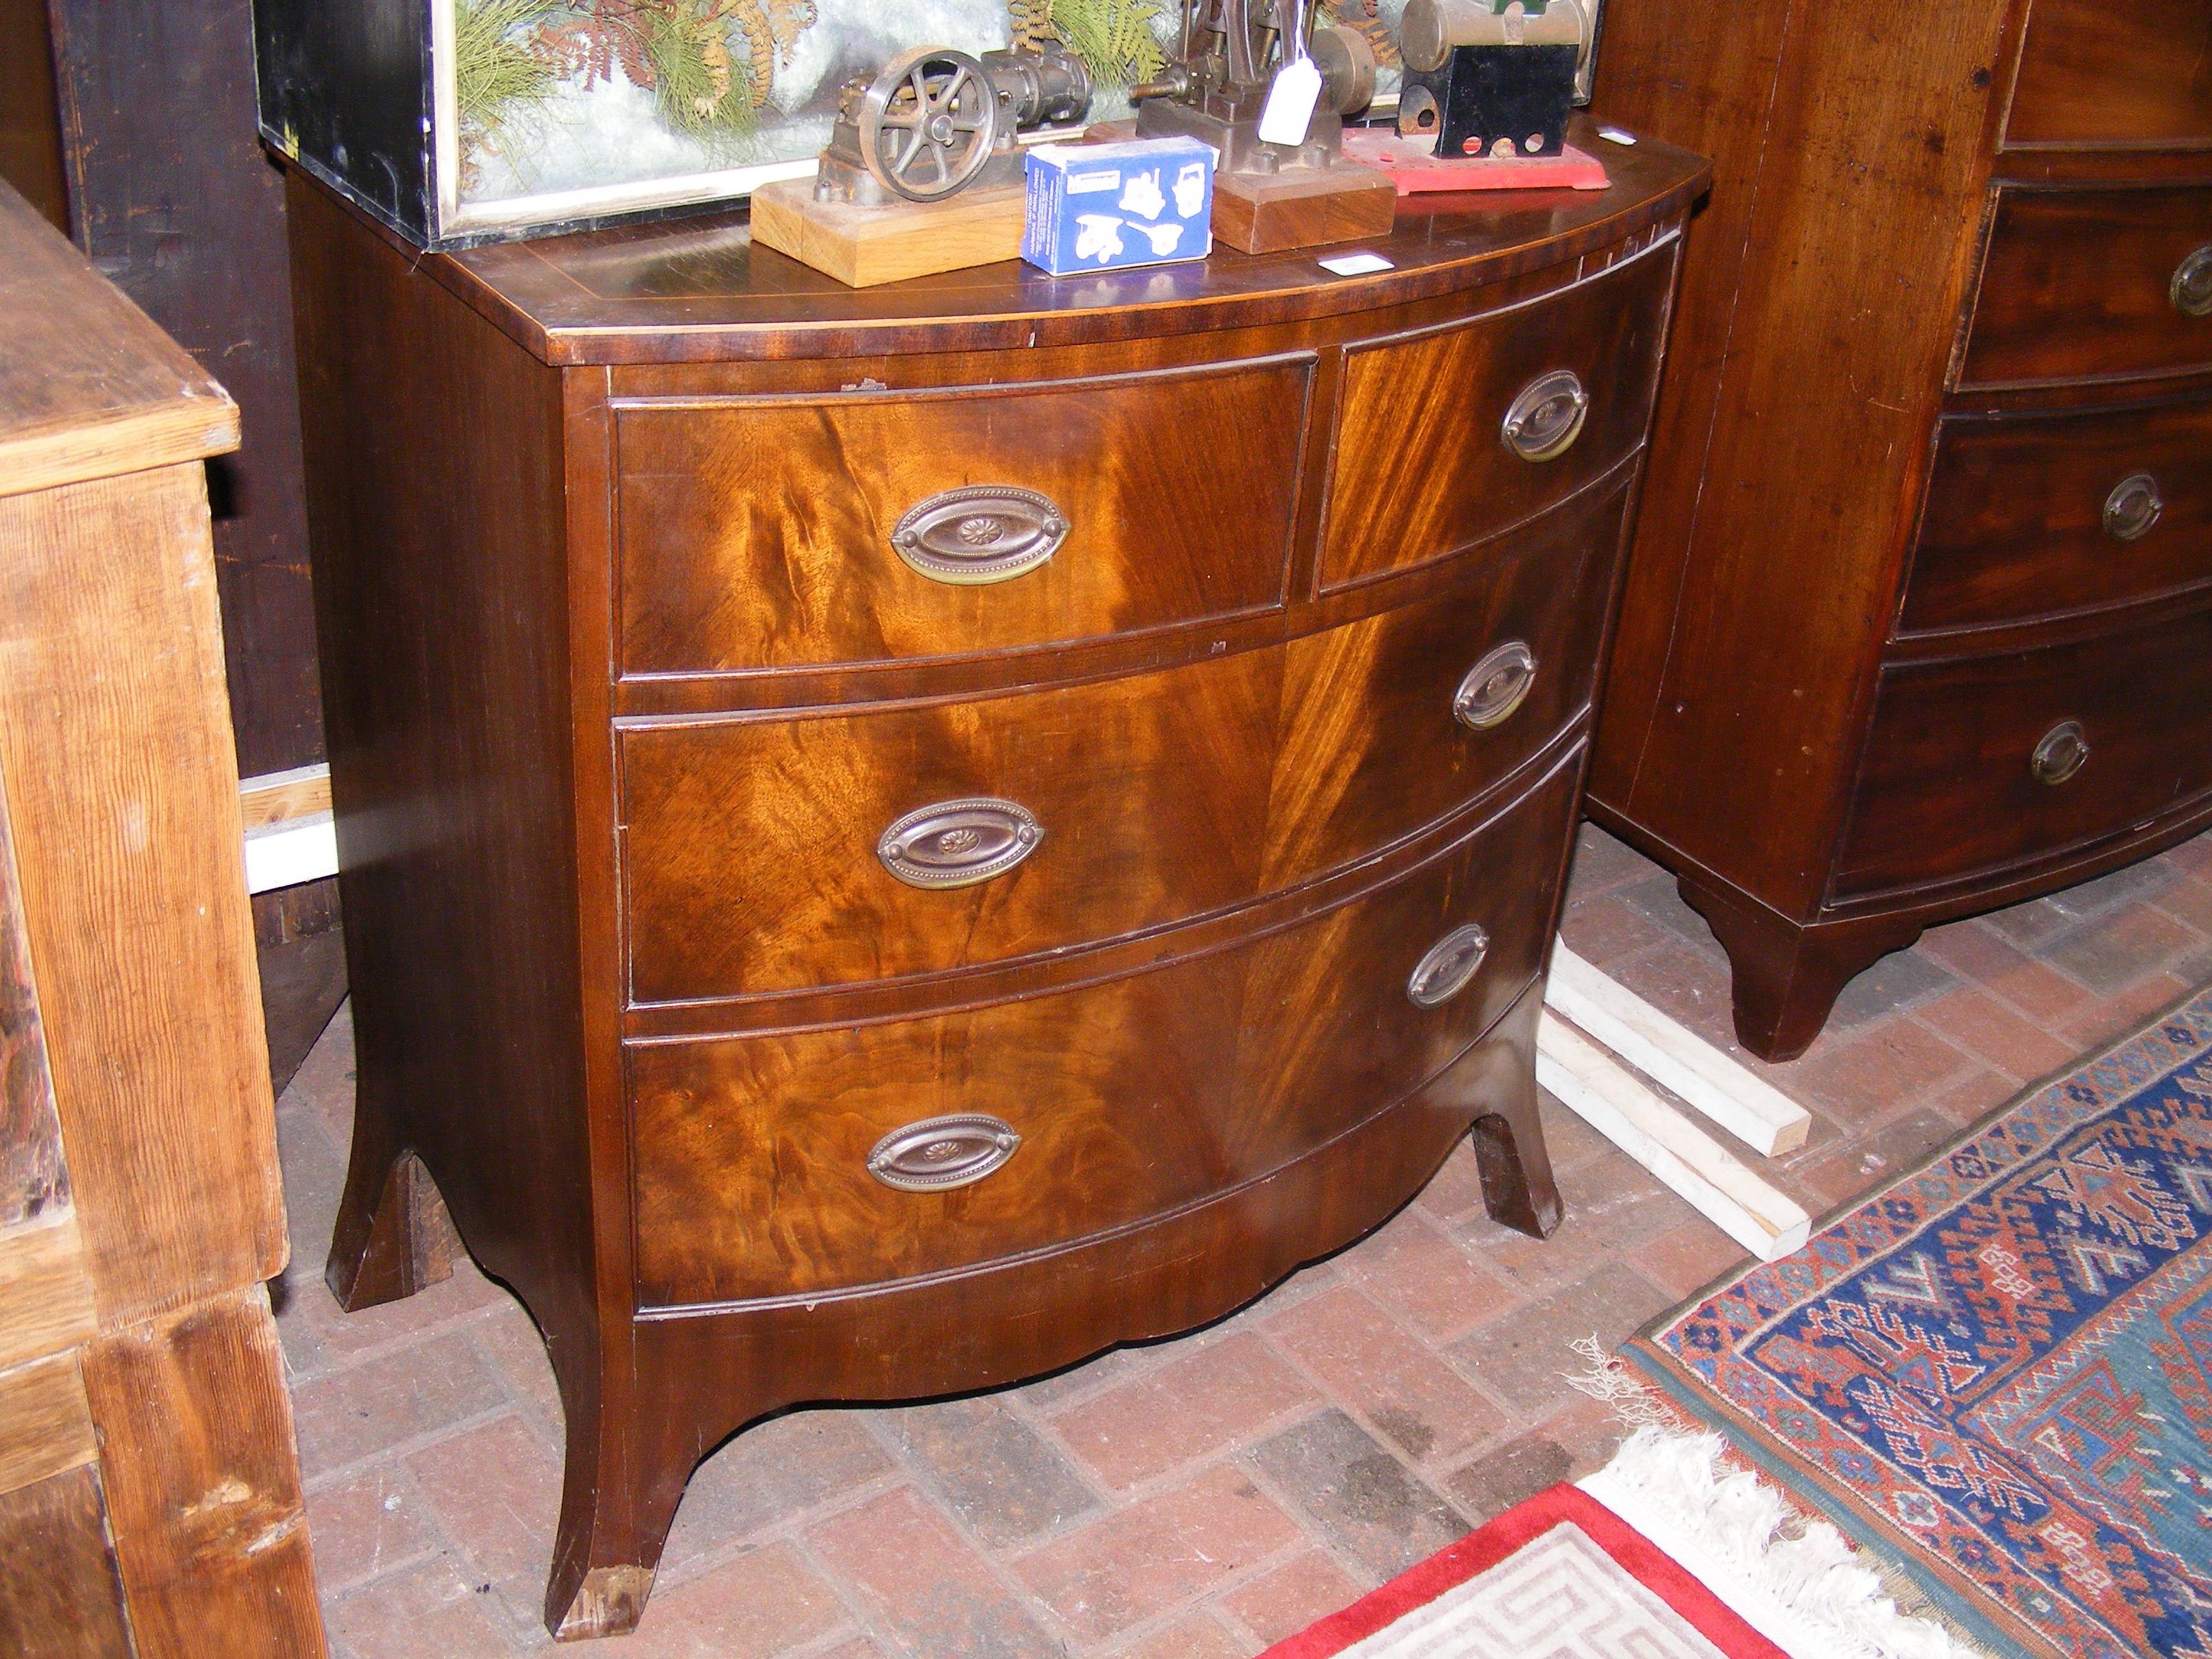 An 80cm wide bow fronted chest of drawers